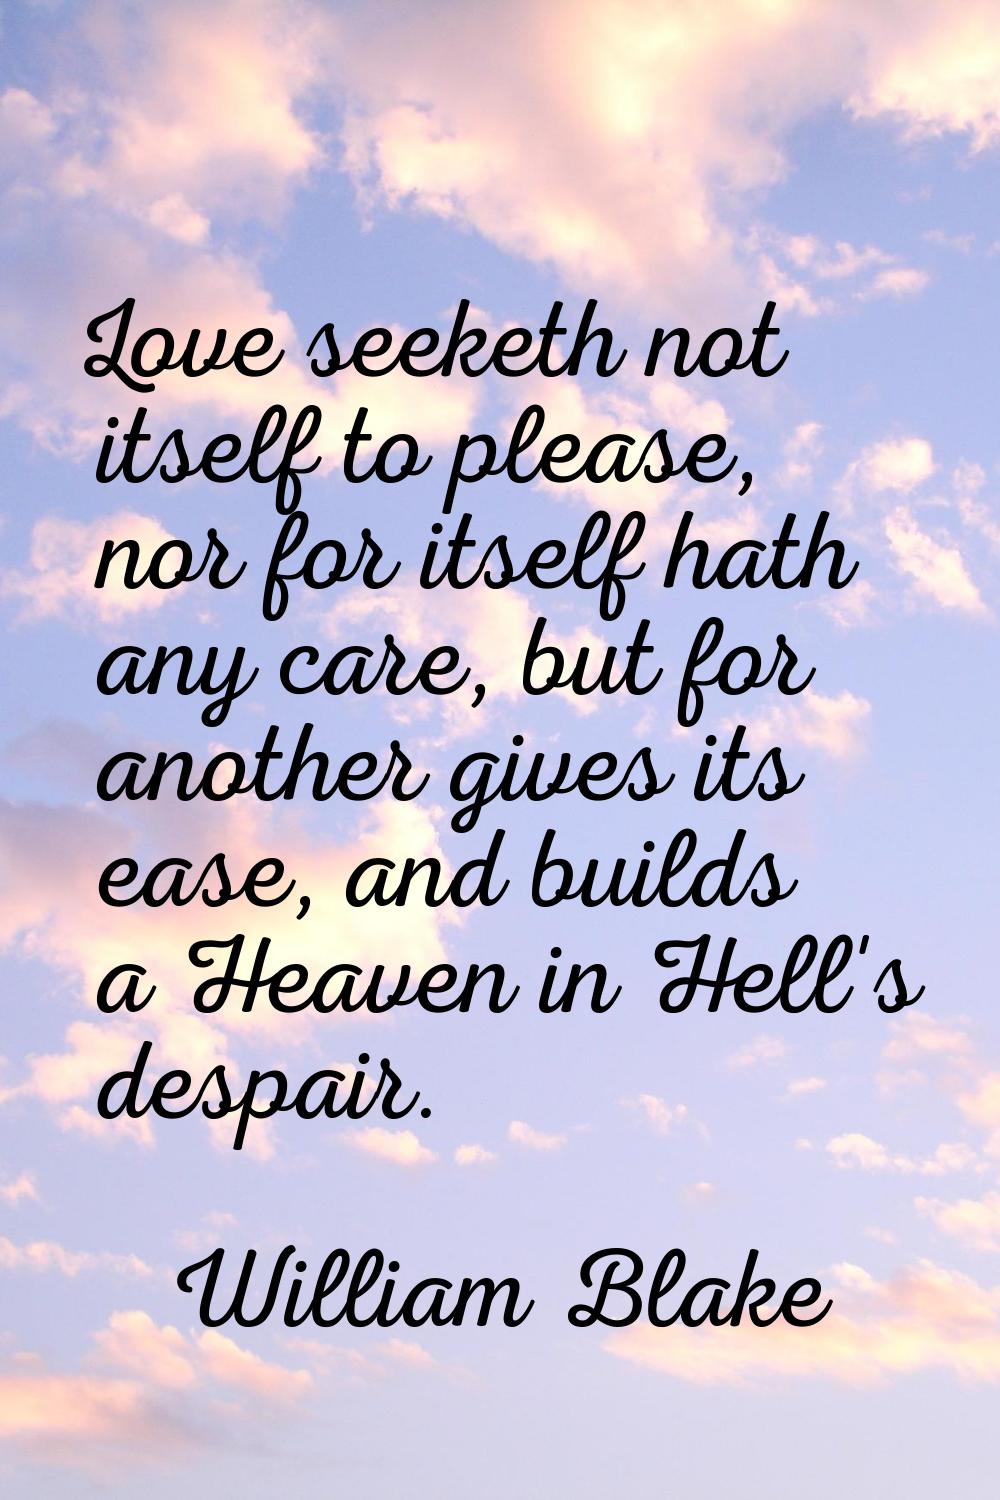 Love seeketh not itself to please, nor for itself hath any care, but for another gives its ease, an